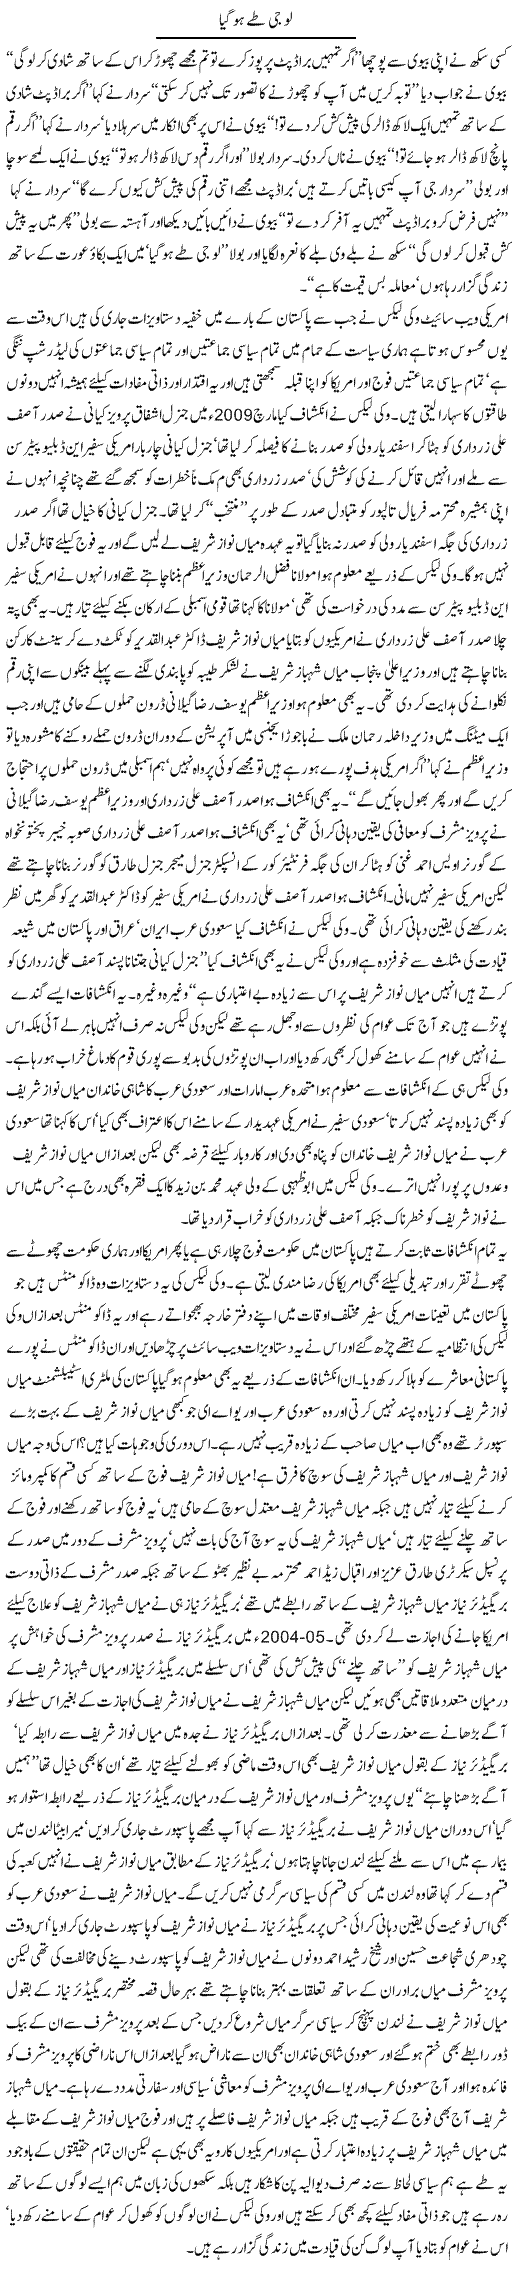 Its Decided Express Column Javed Chaudhry 3 December 2010